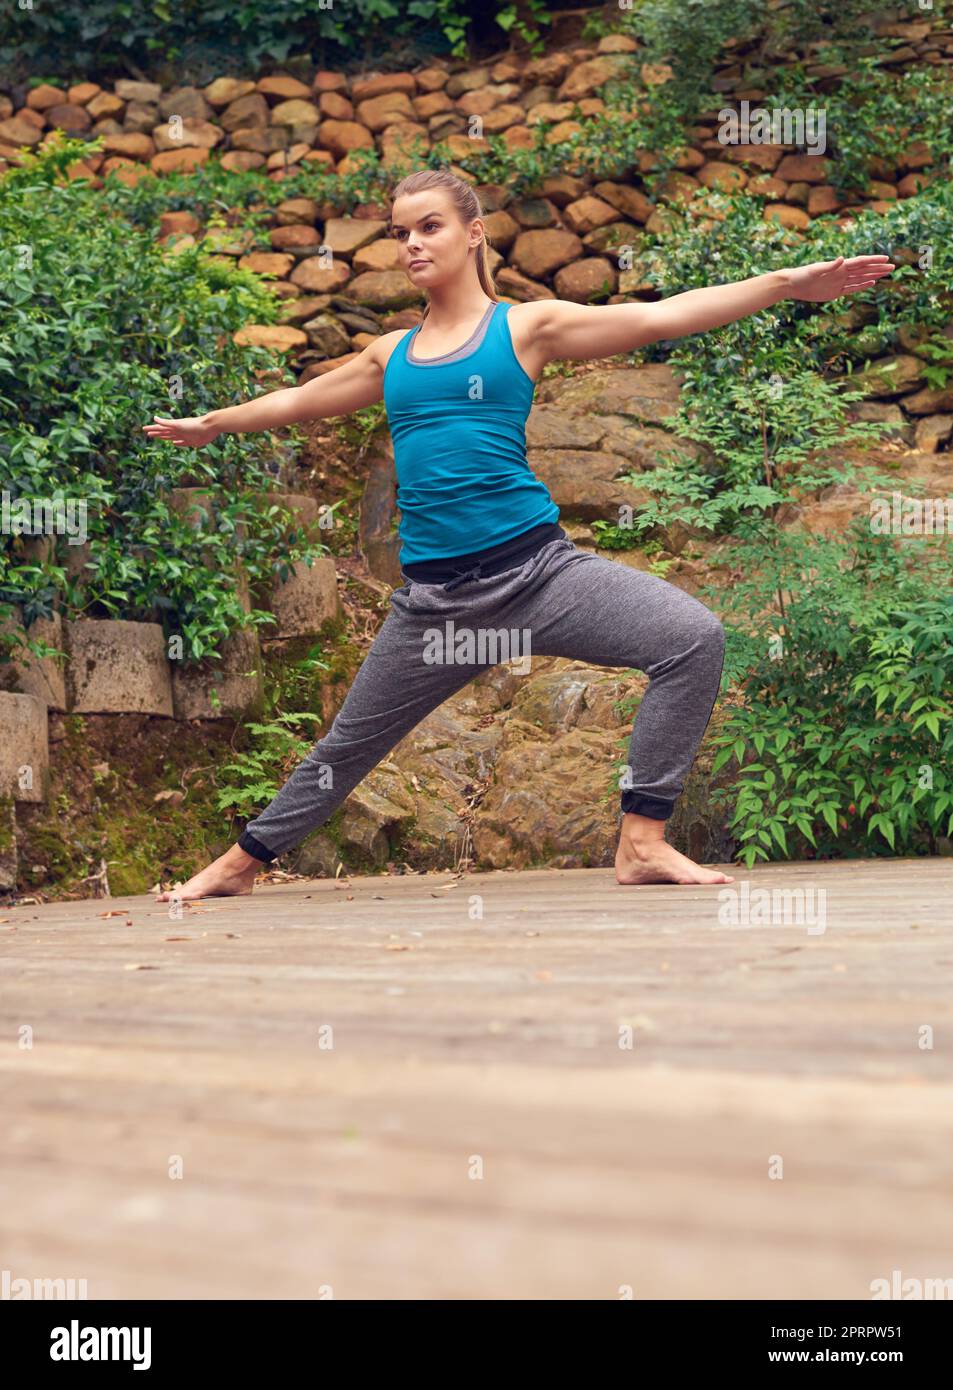 The mind, body and spirit aligned. a young woman practicing yoga outdoors. Stock Photo